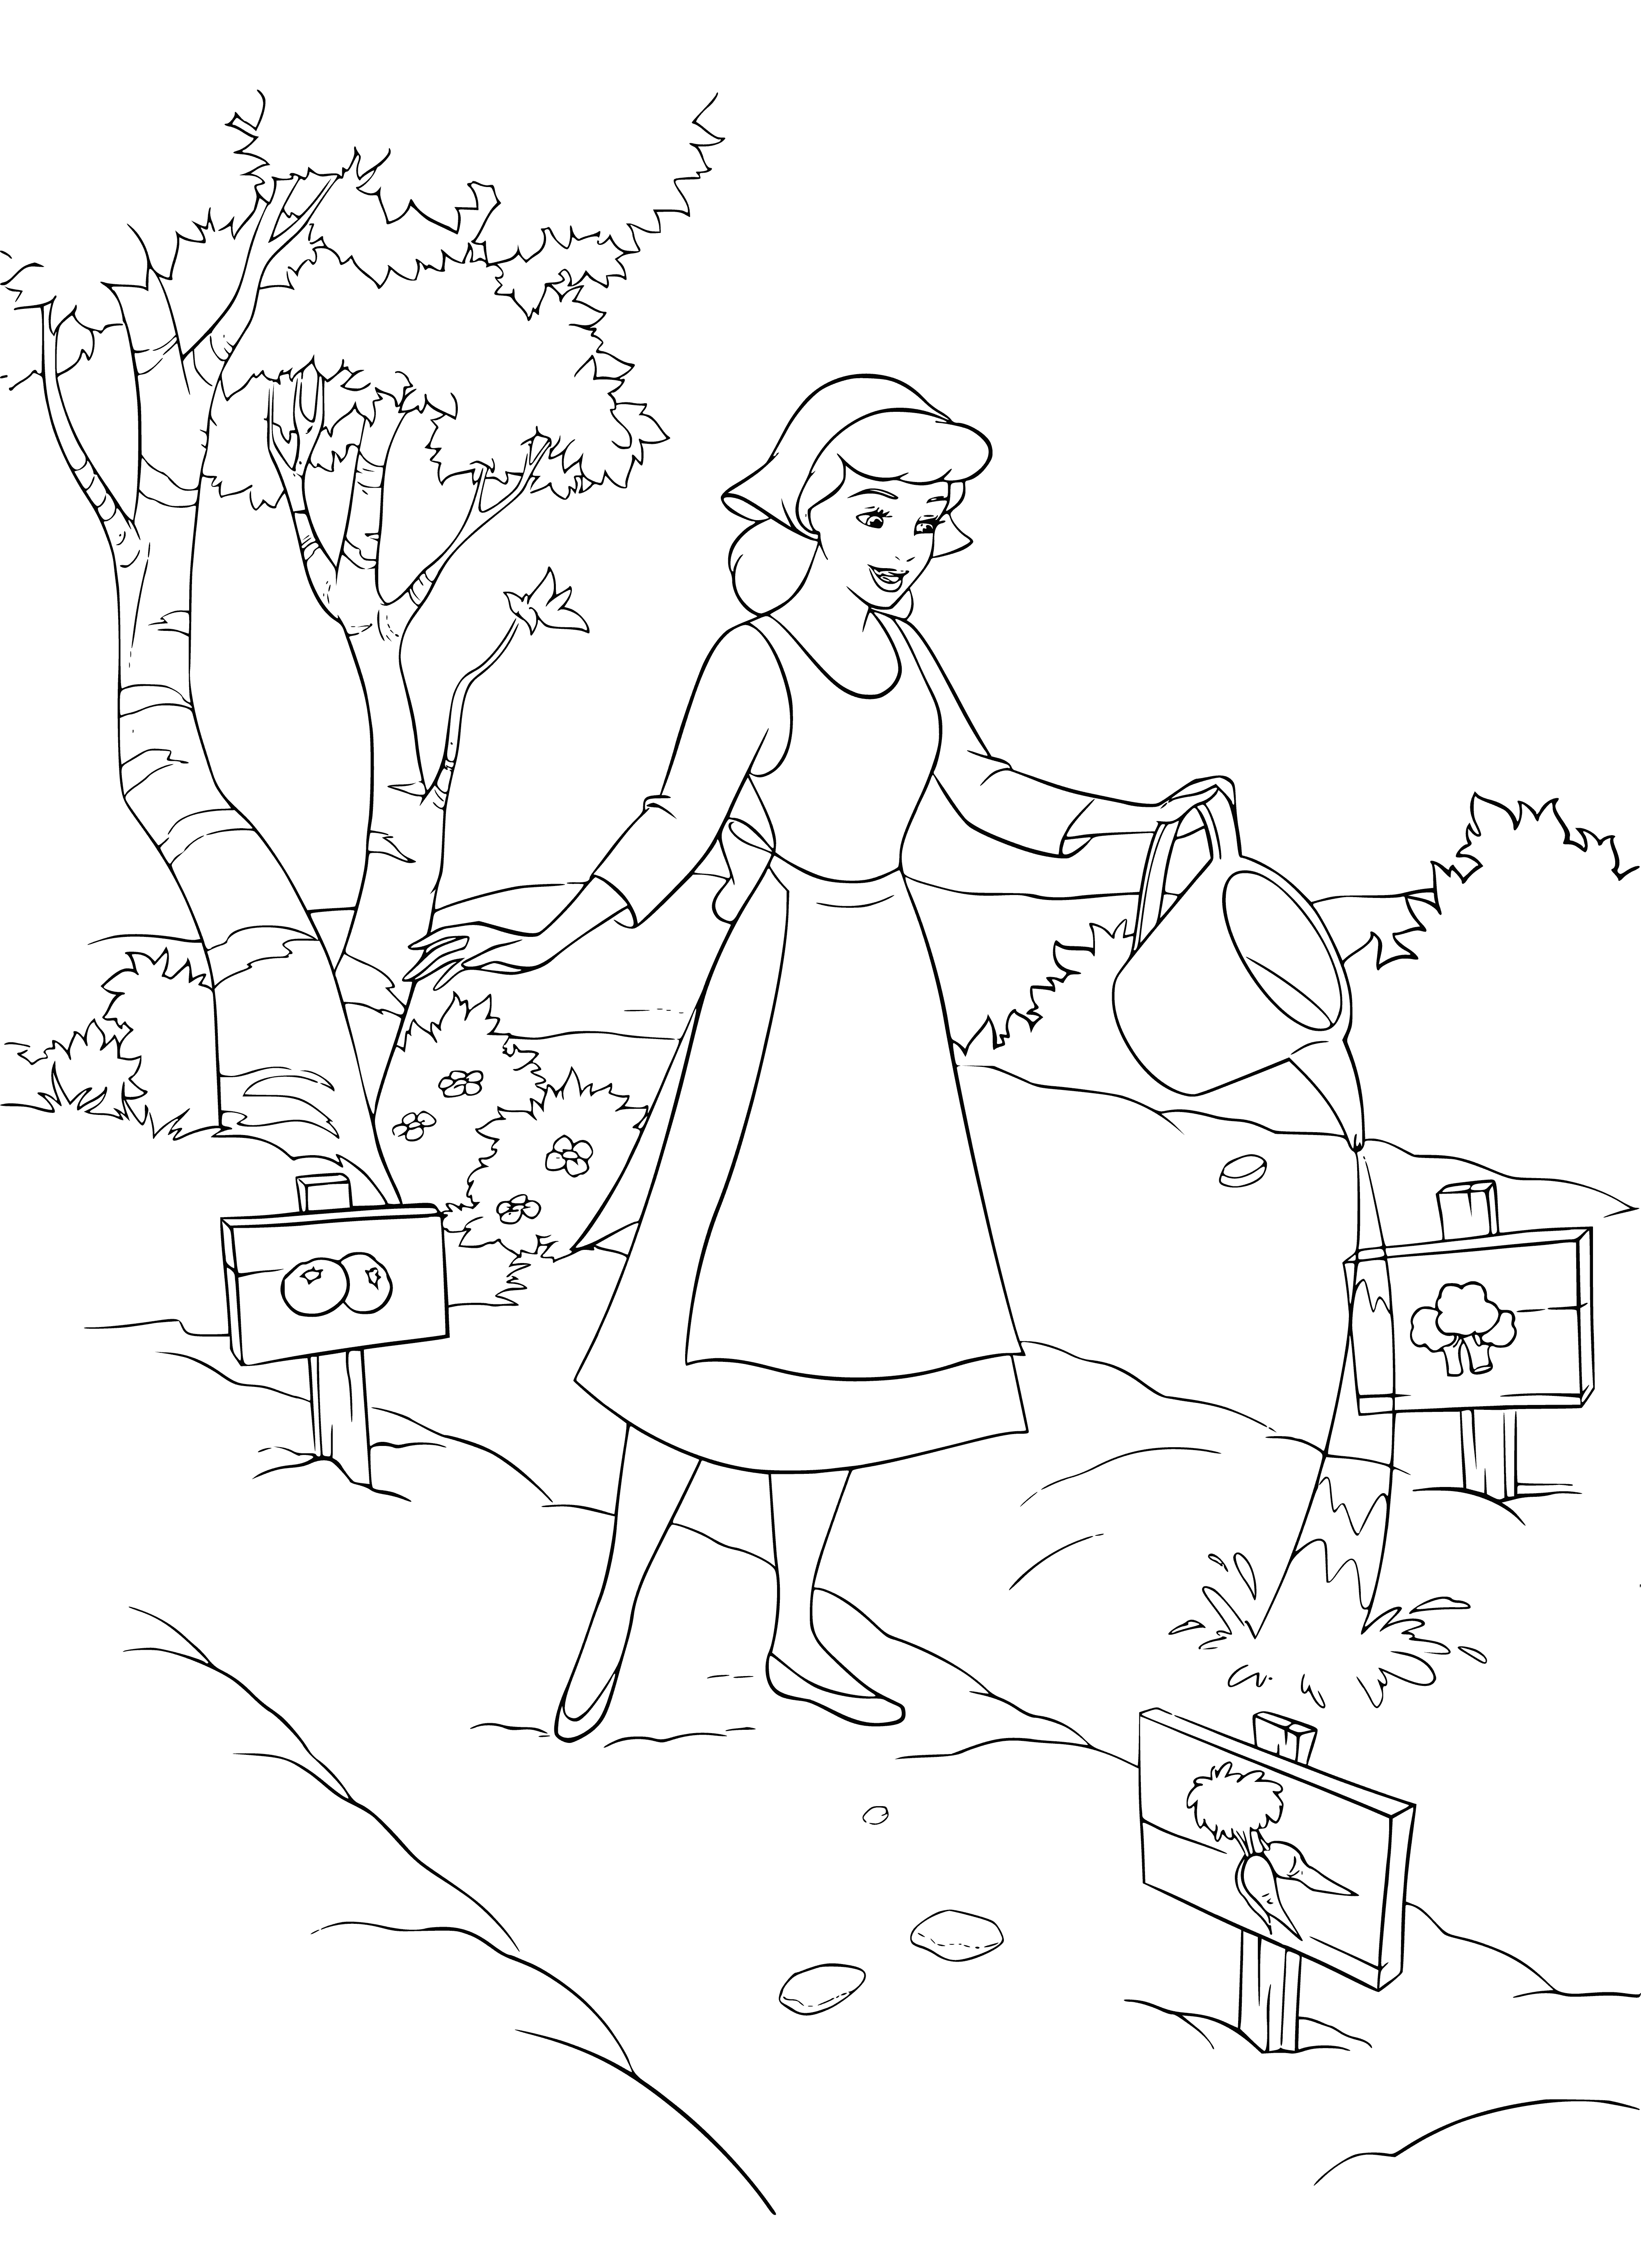 coloring page: Cinderella waters the garden, wearing a blue dress and white apron. A castle is in the background.